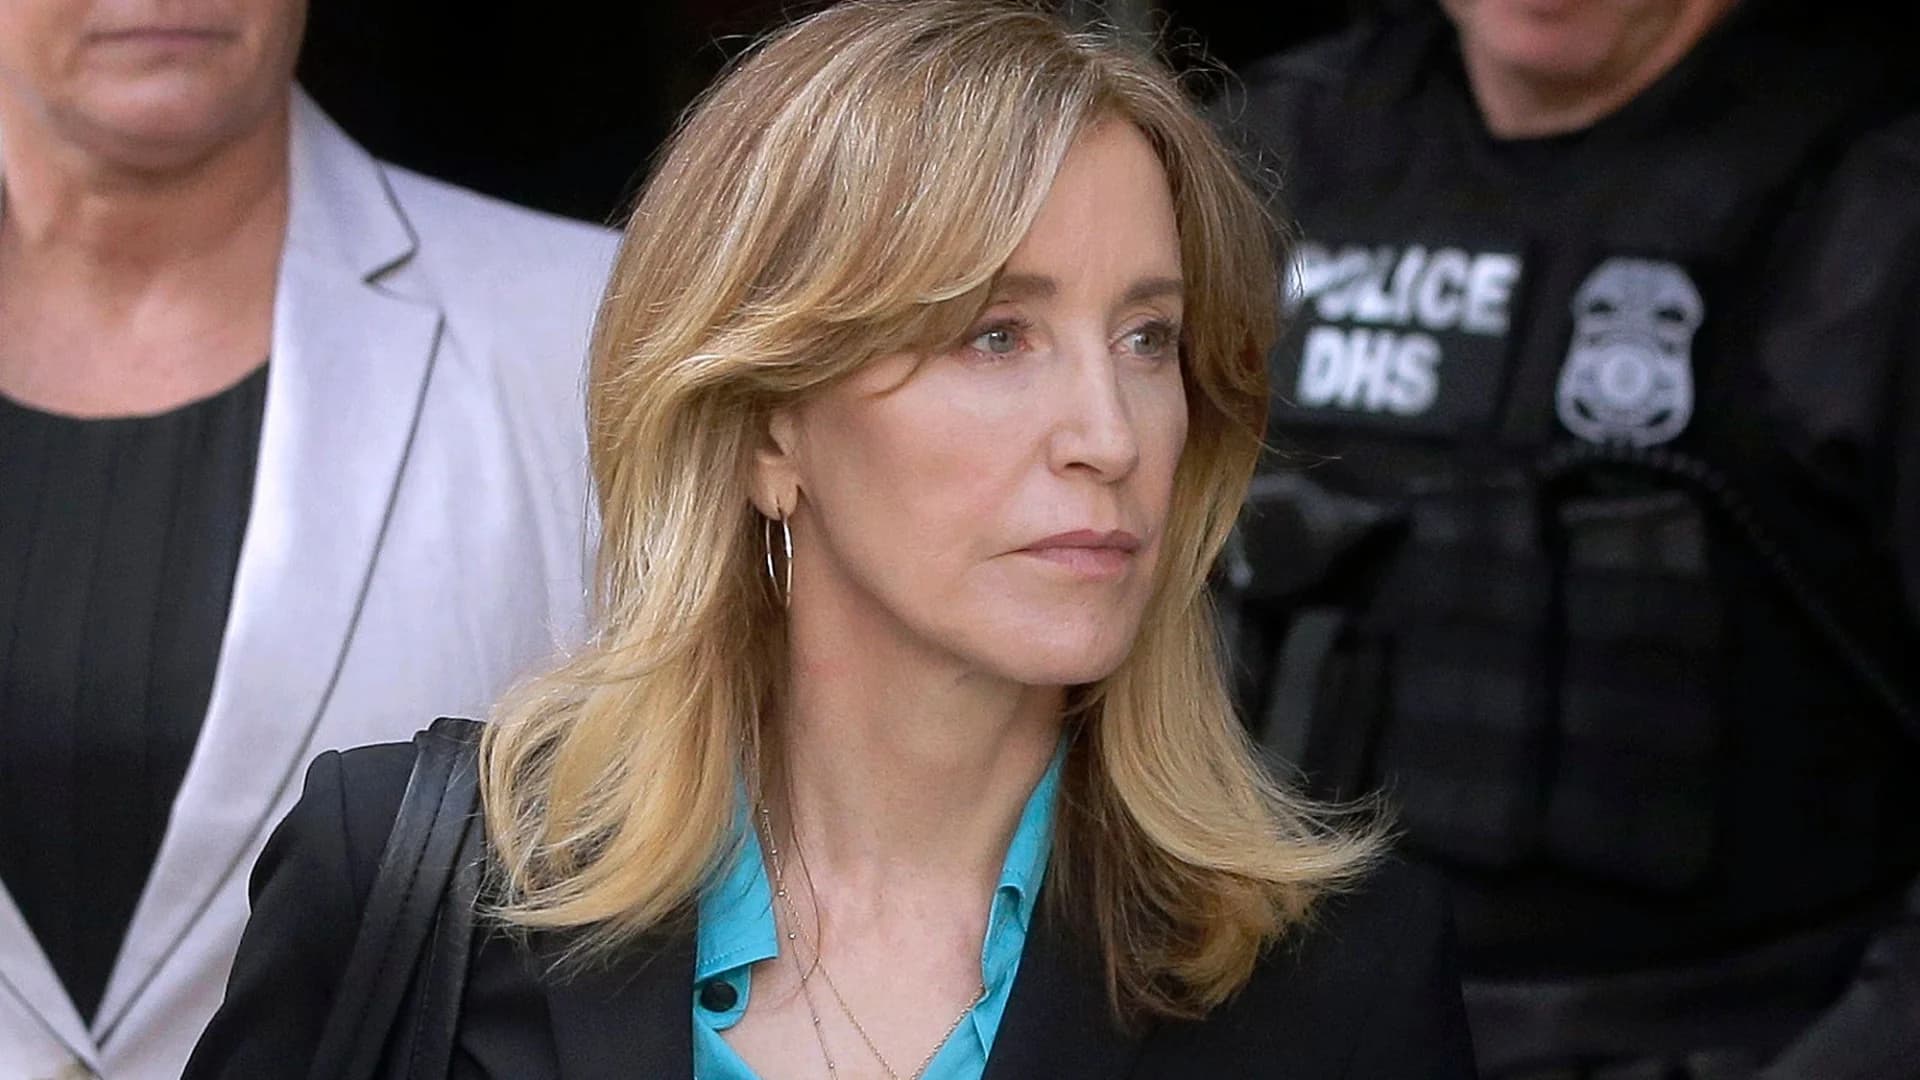 Felicity Huffman to plead guilty in college scam